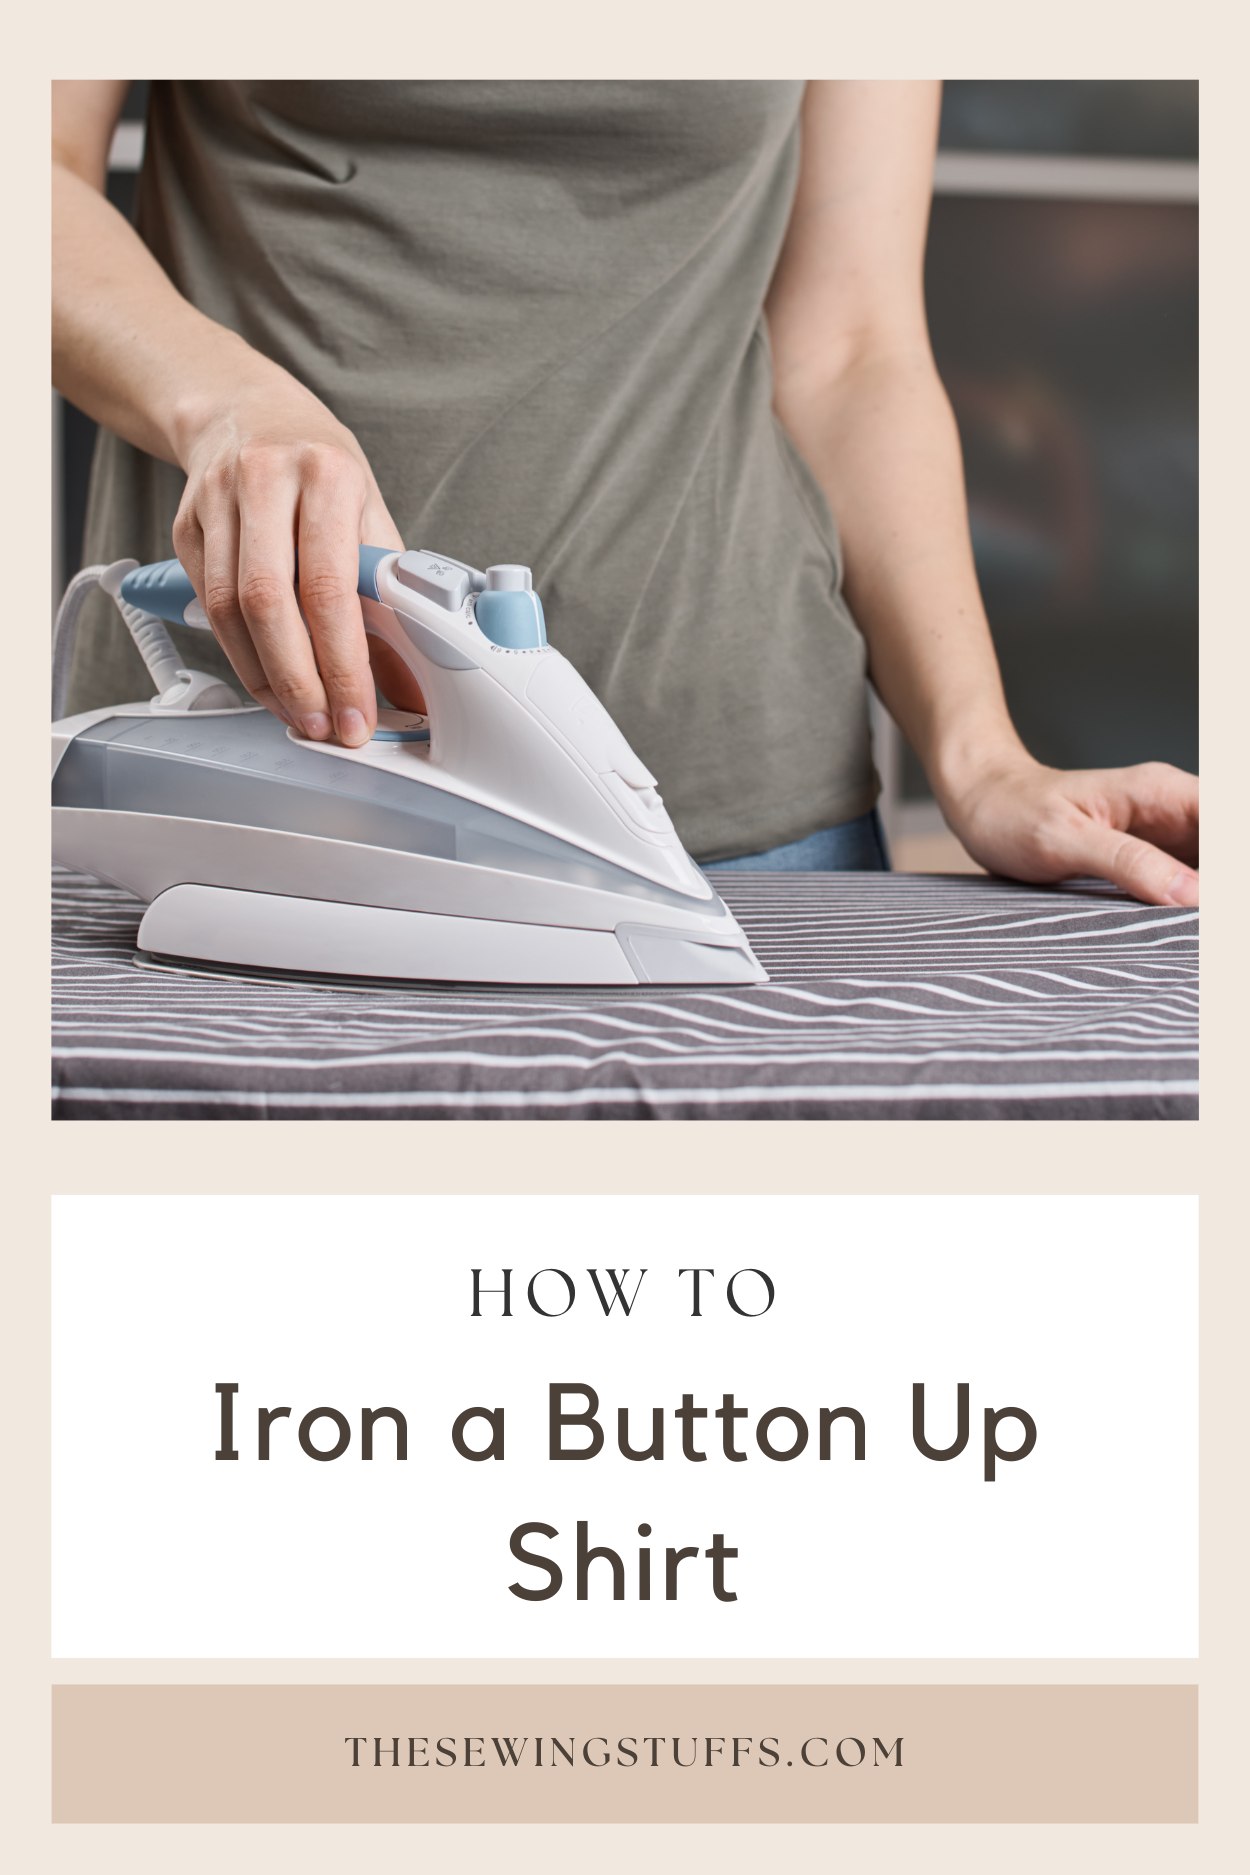 How to Iron a Button Up Shirt